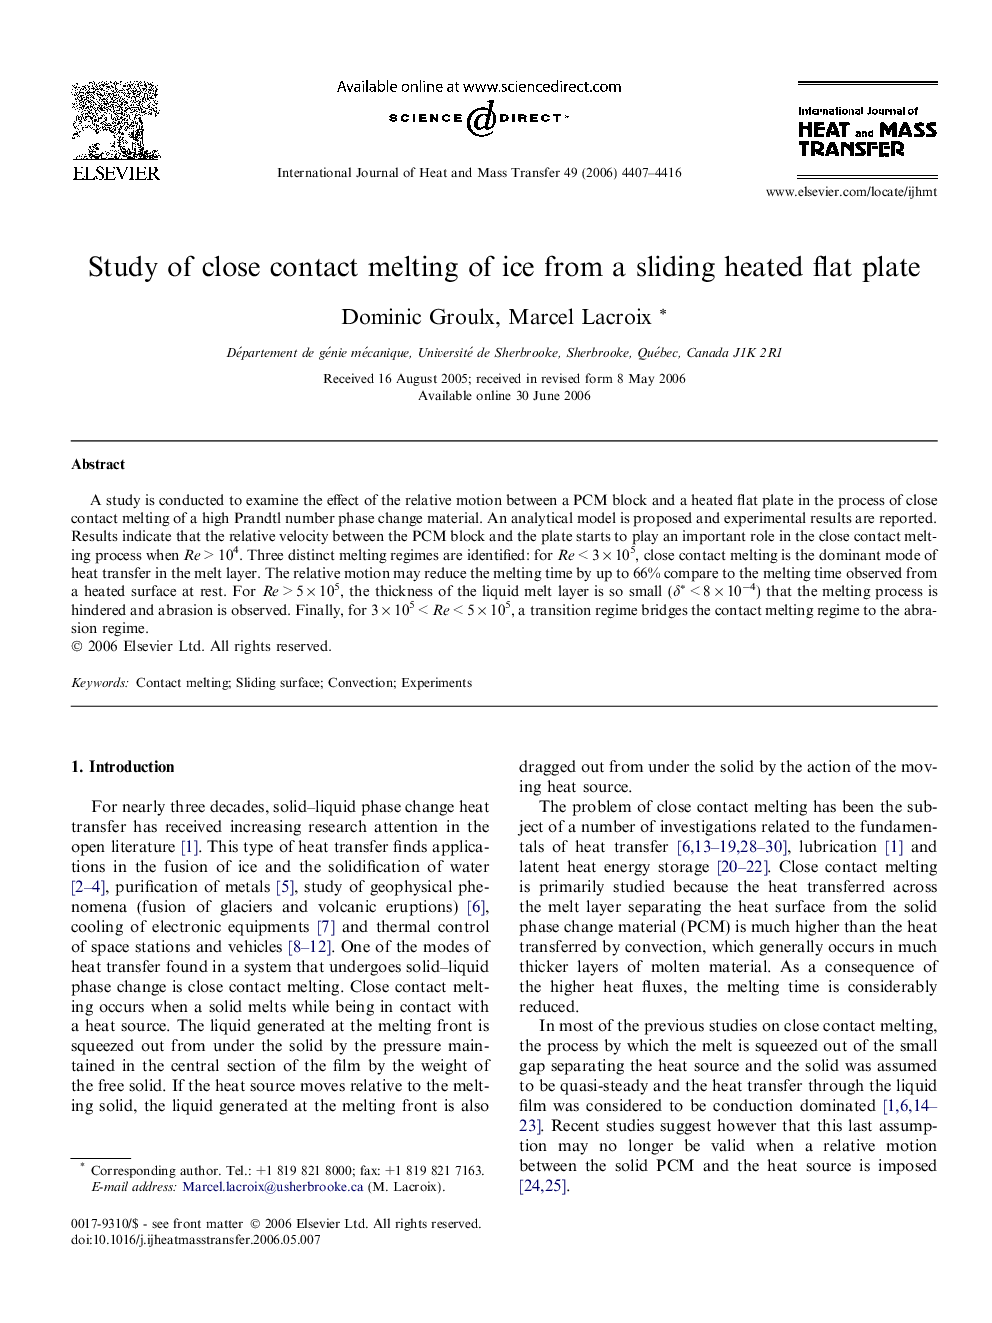 Study of close contact melting of ice from a sliding heated flat plate